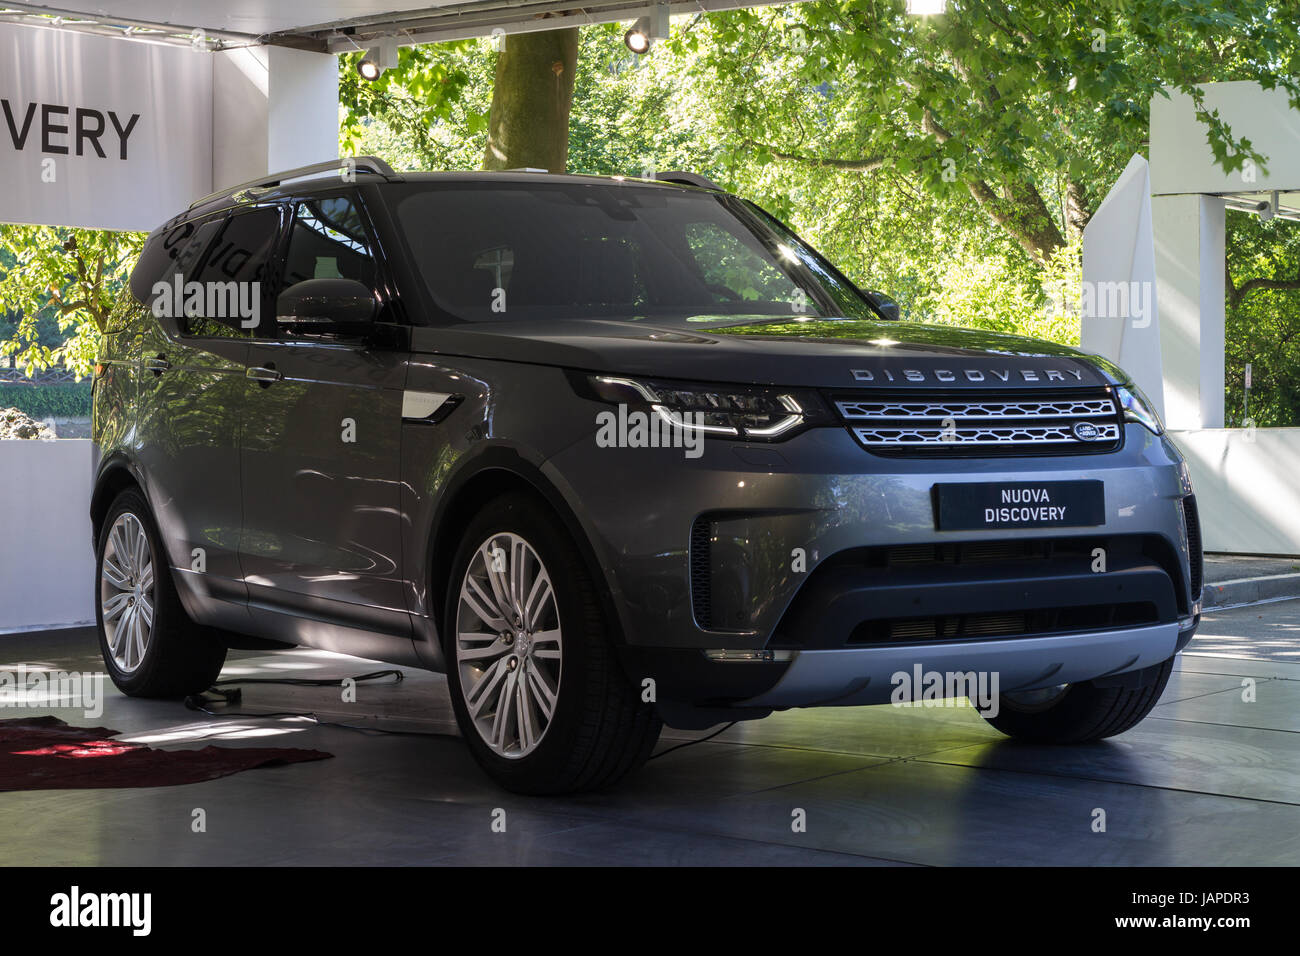 Turin, Italy, 7th June 2017. A Land Rover Discovery. Third edition of Parco Valentino car show hosts cars by many automobile manufacturers and car designers inside Valentino Park in Torino, Italy. Stock Photo